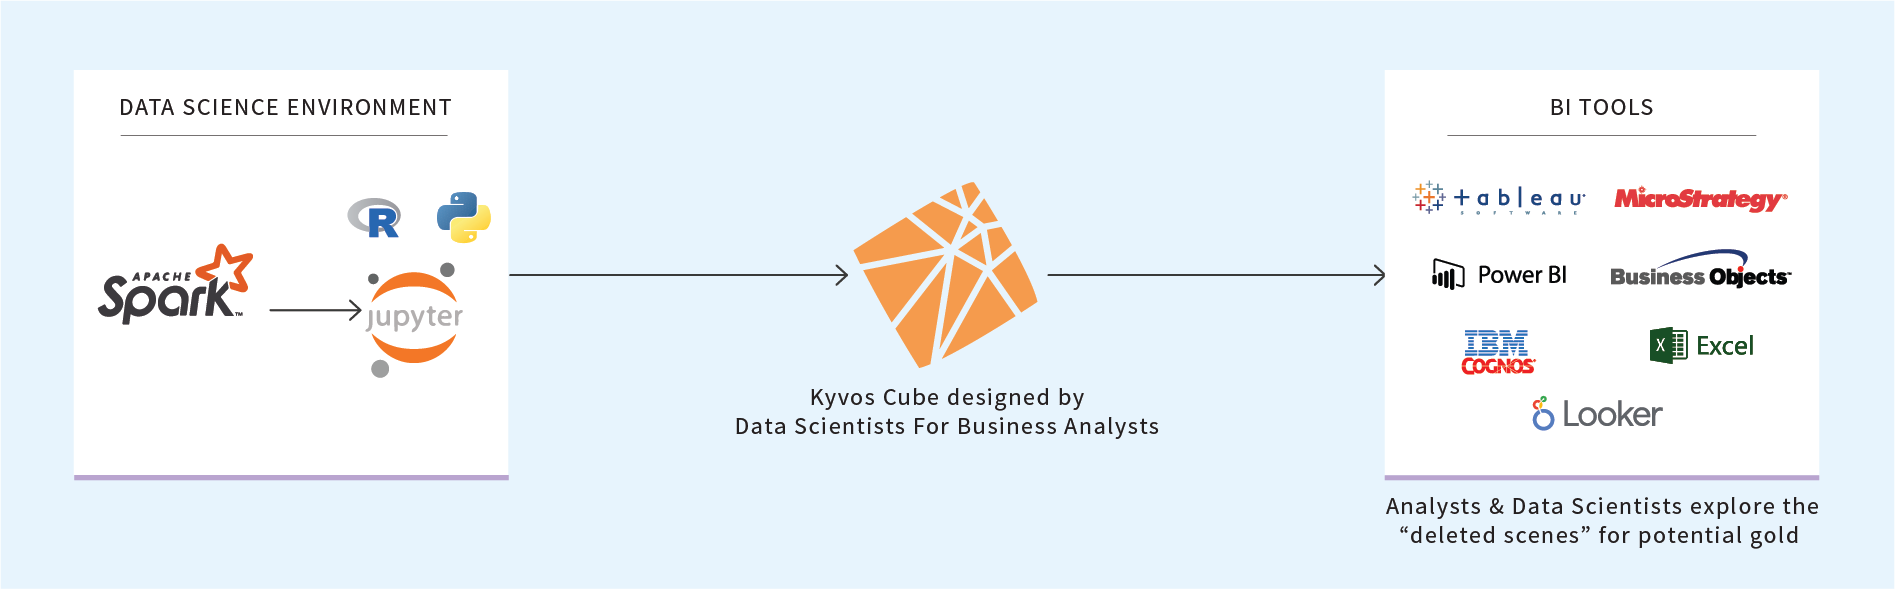 Model Kyvos cubes on potentially predictive data for business users